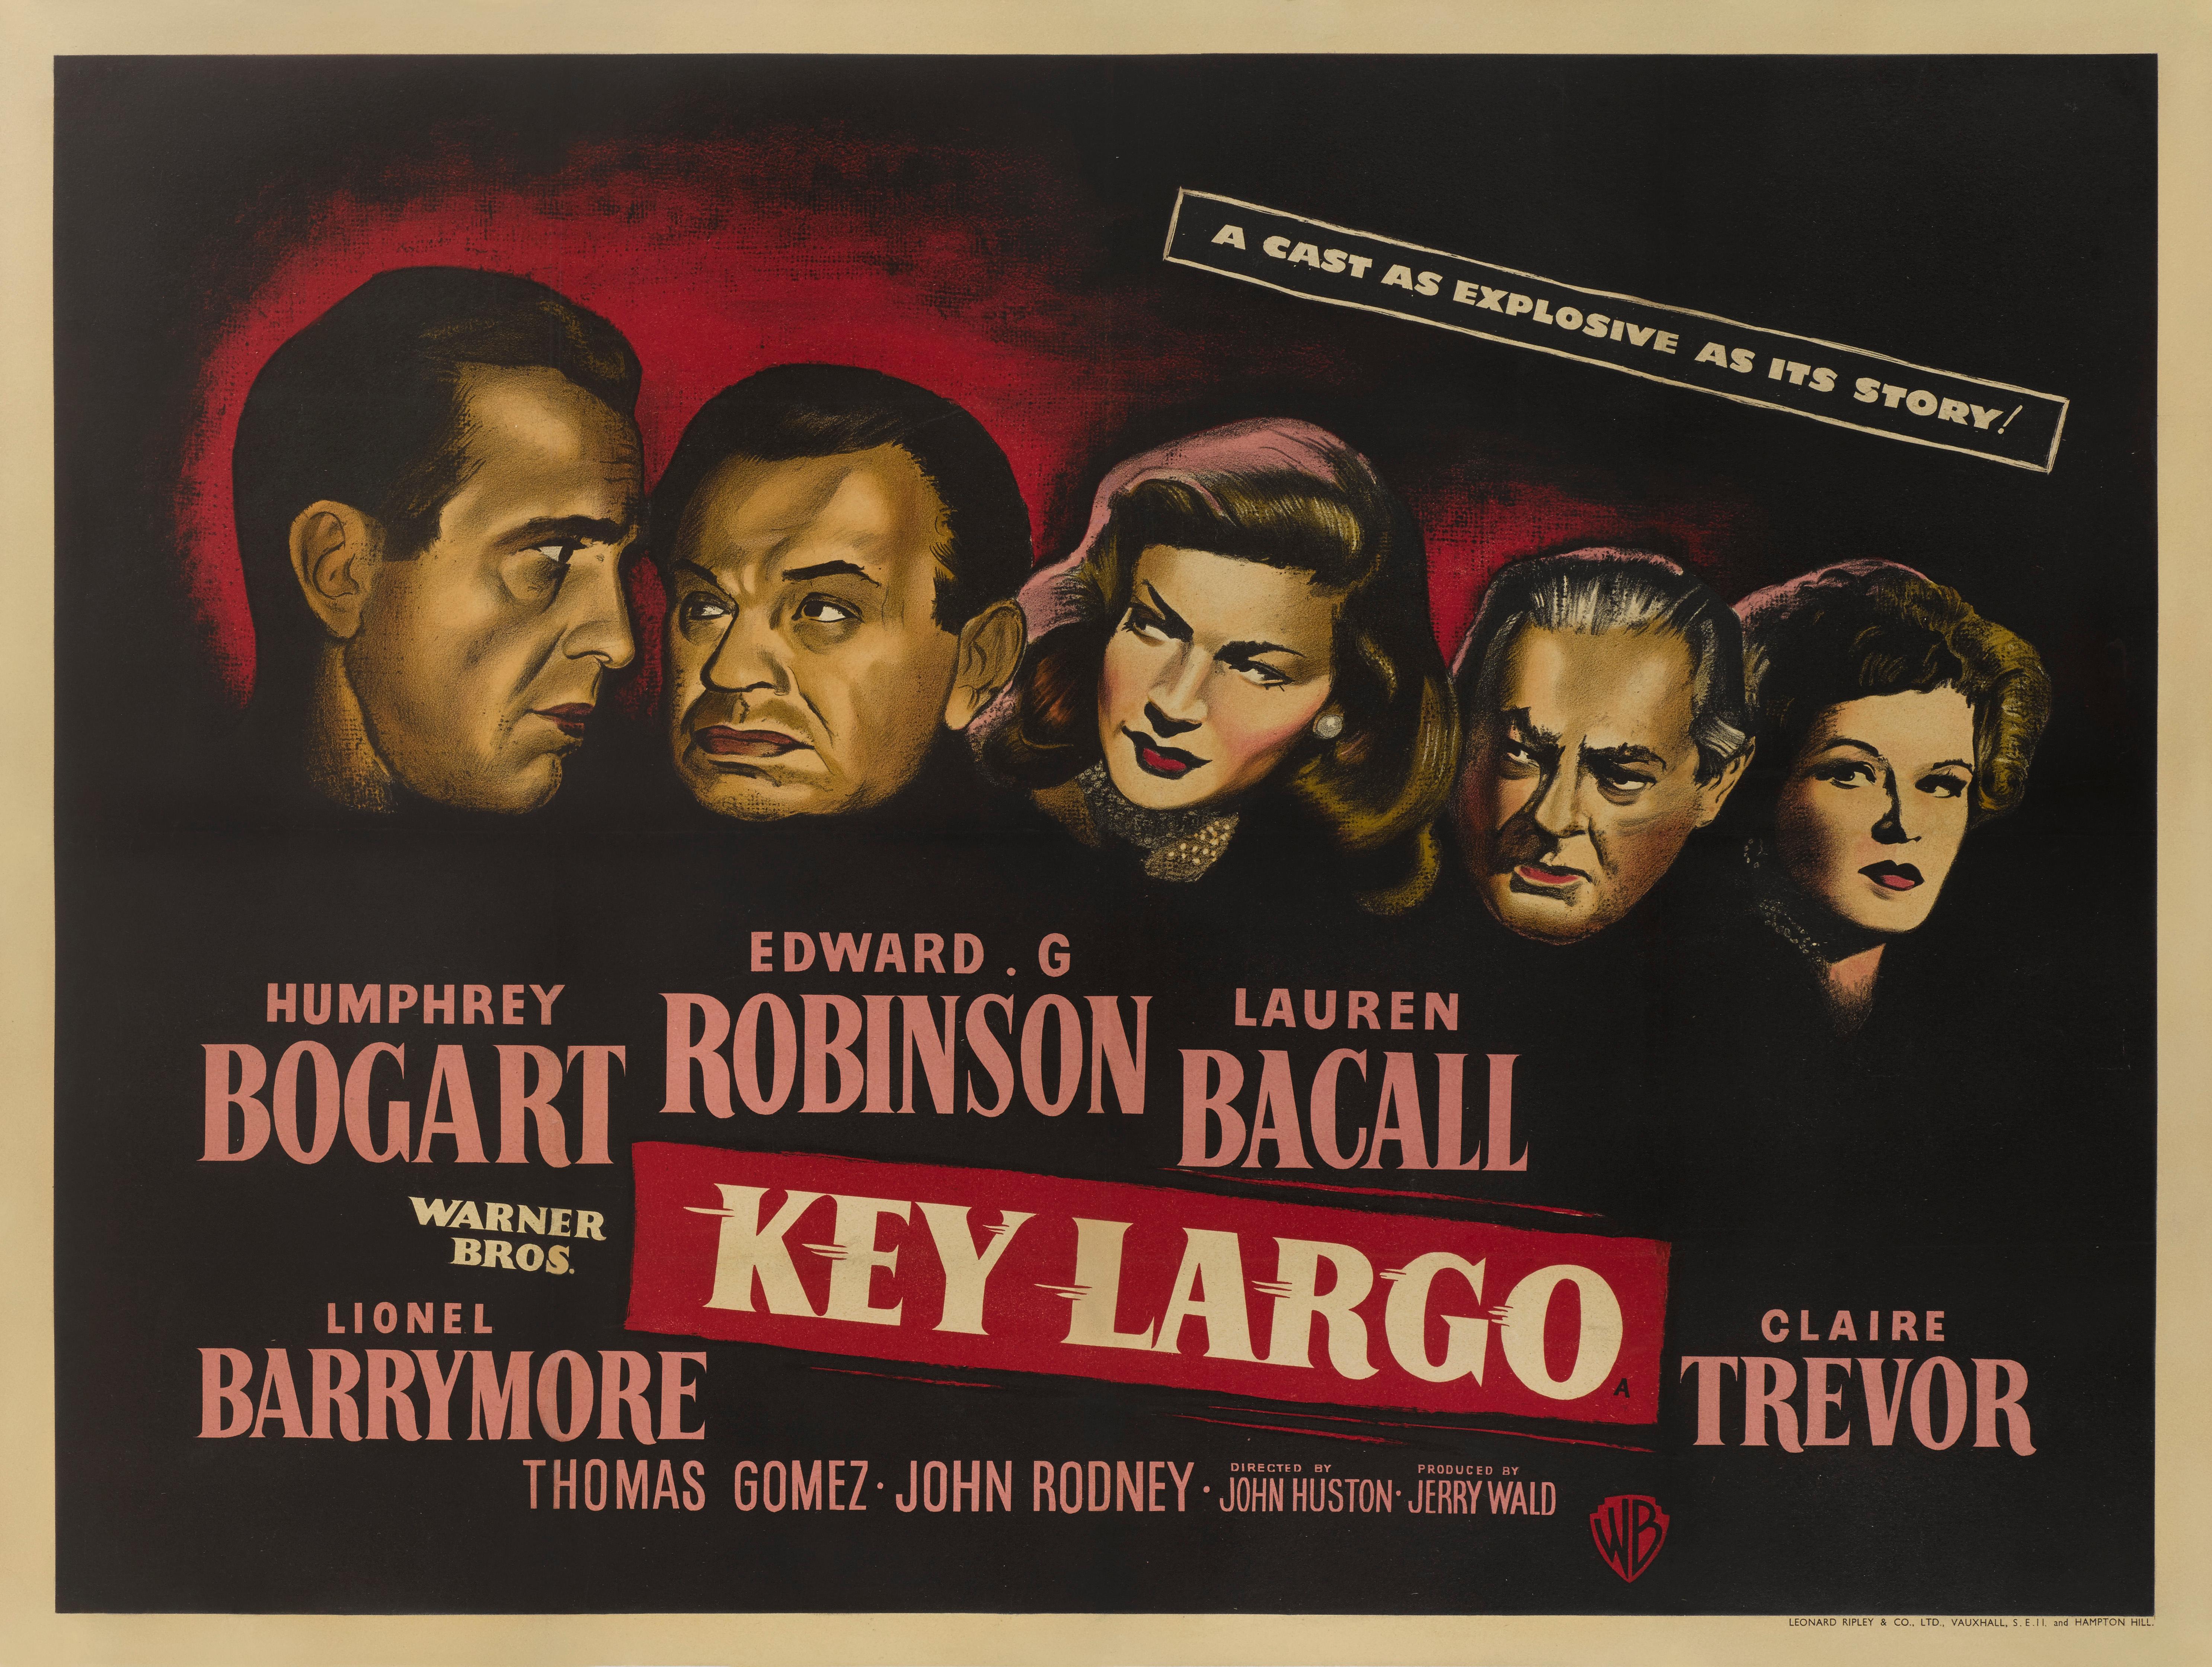 Original British film poster.
This American film noir crime drama was directed by John Huston, and stars Humphrey Bogart, Edward G. Robinson and Lauren Bacall. It was the fourth and final film pairing of Bogart and Bacall. Edward G. Robinson gives